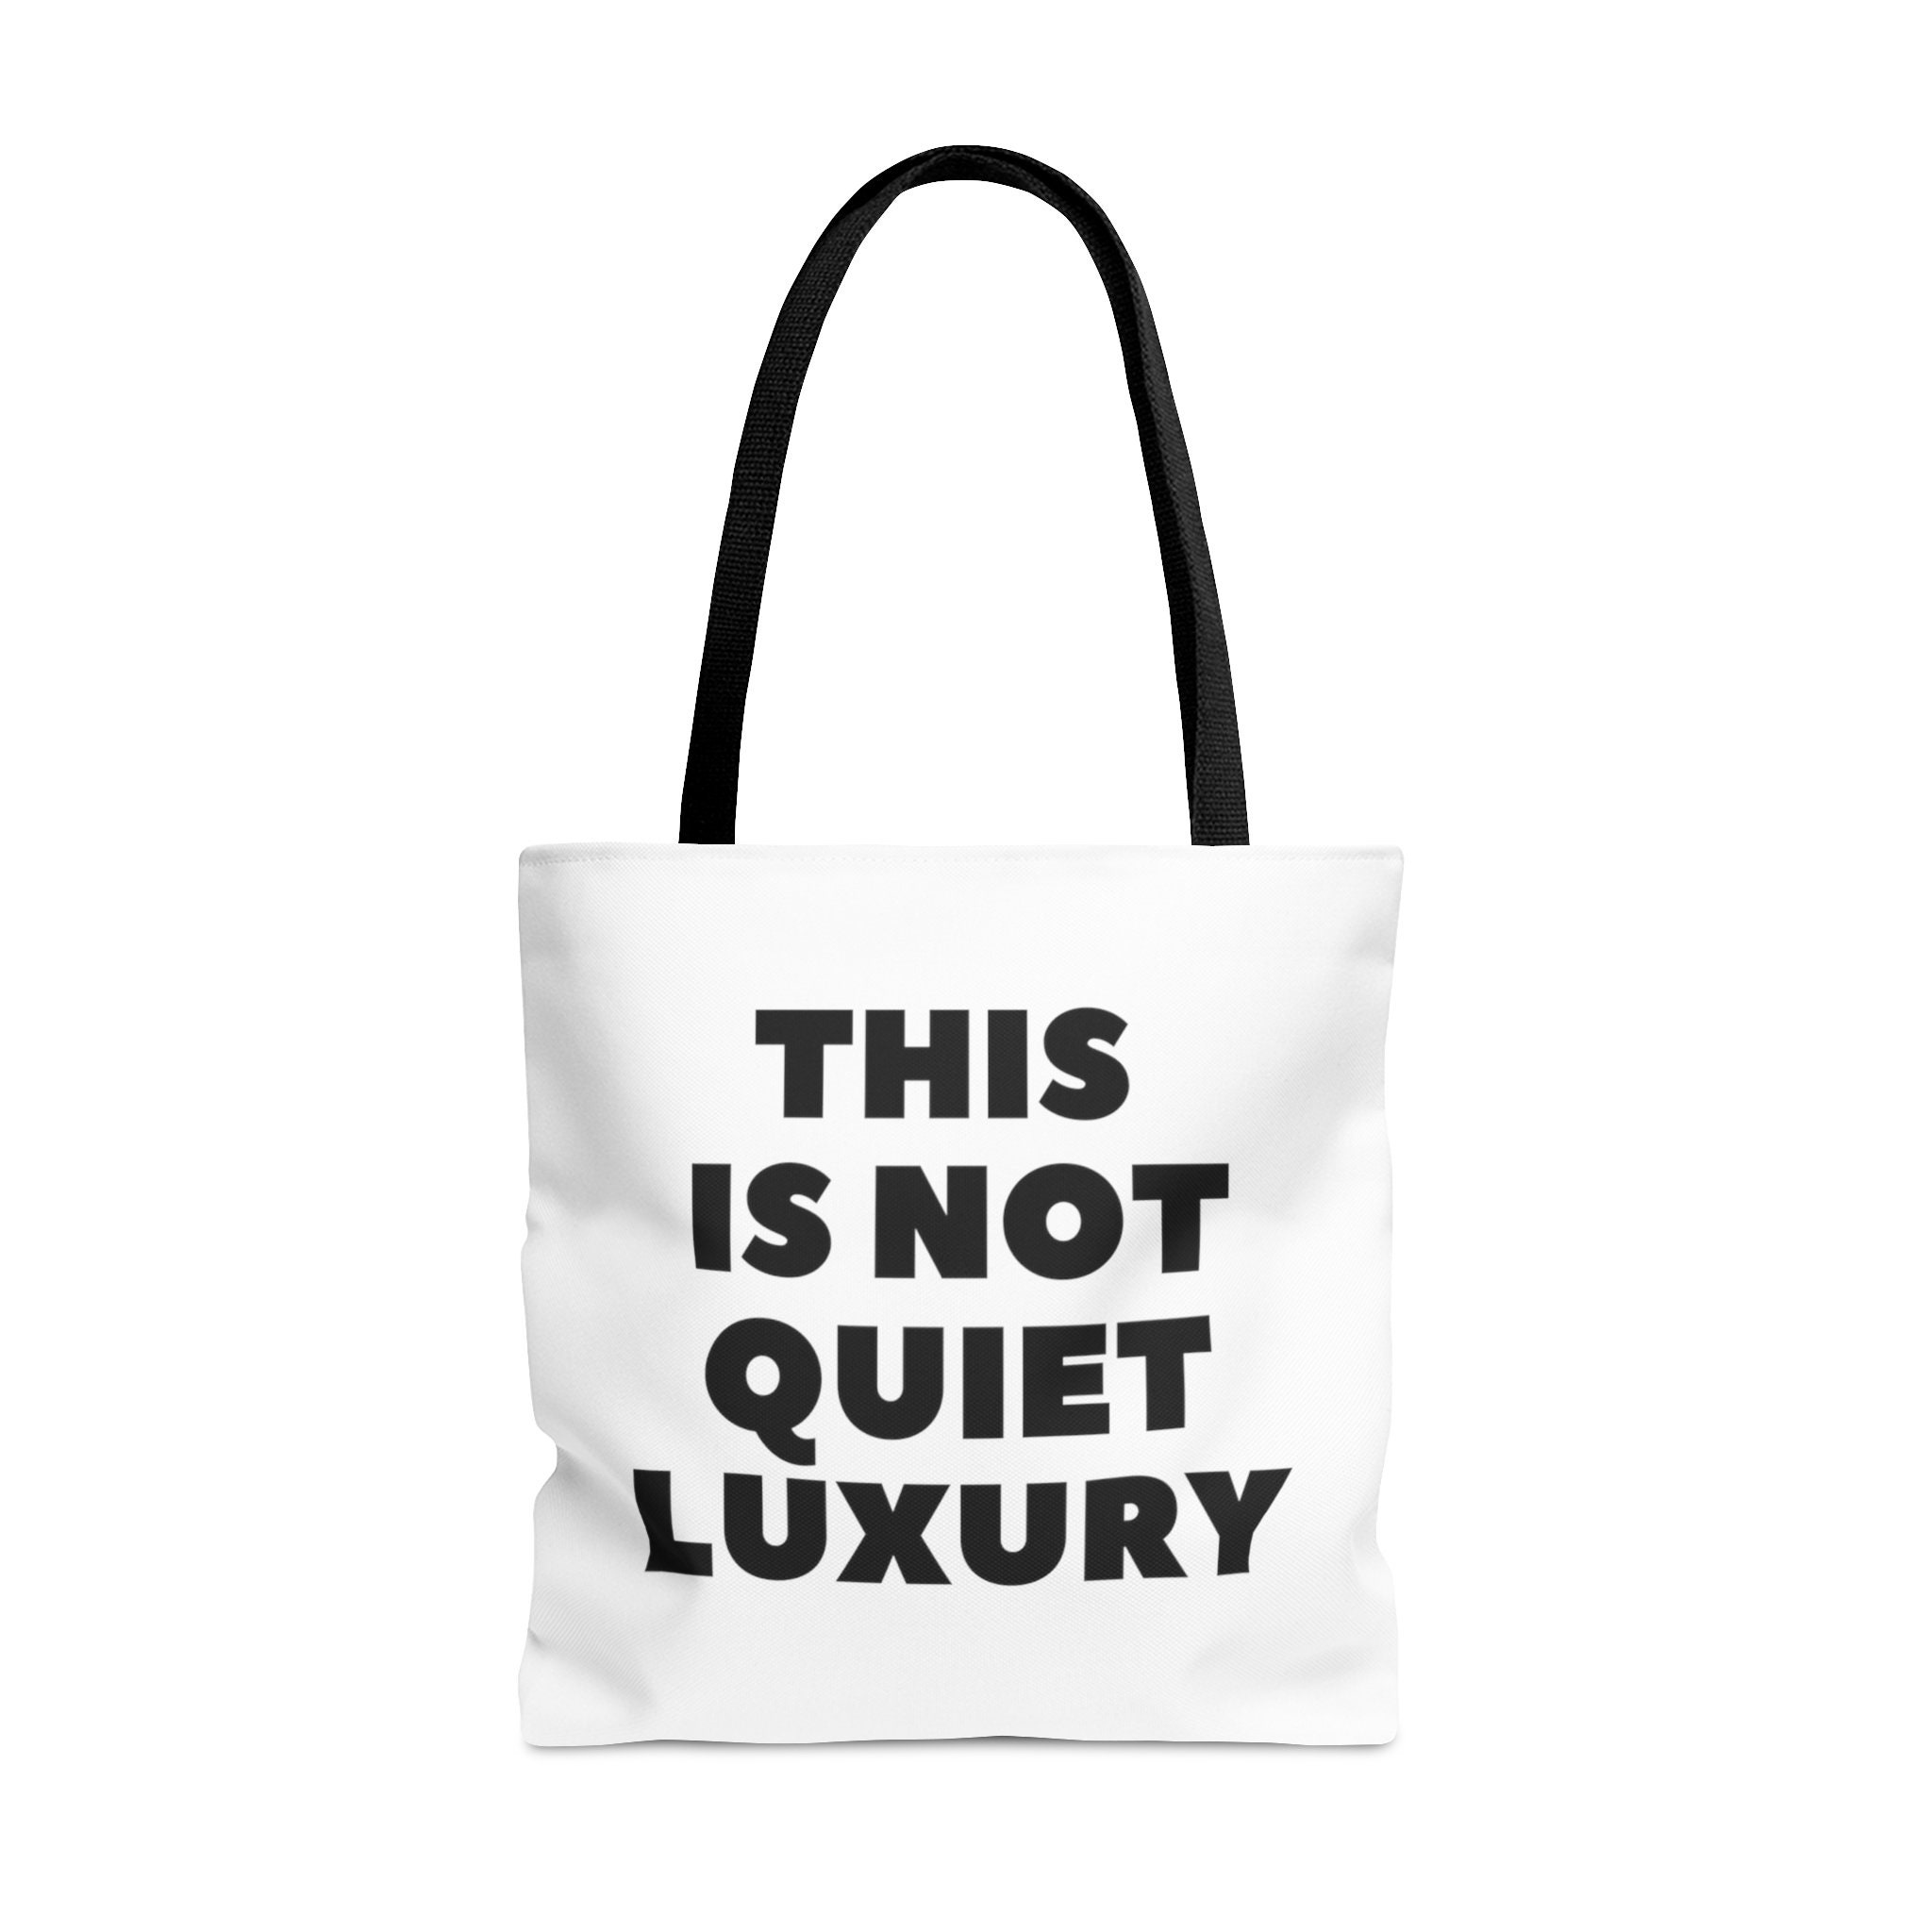 This Is Not Quiet Luxury Tote Bag - White Tote Bag